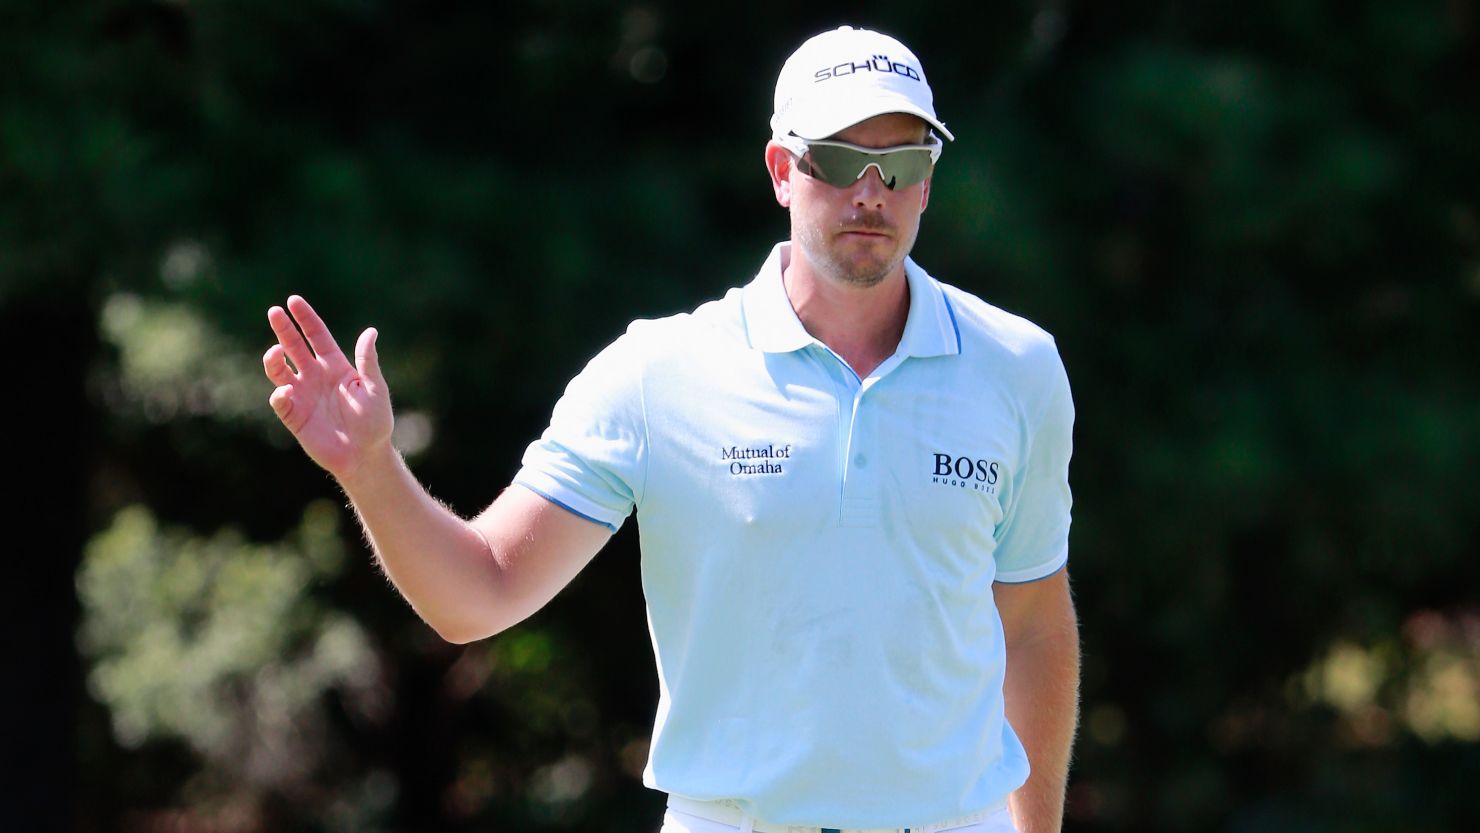 Sweden's Henrik Stenson produced another composed display at Atlanta's East Lake Golf Club on Friday. 